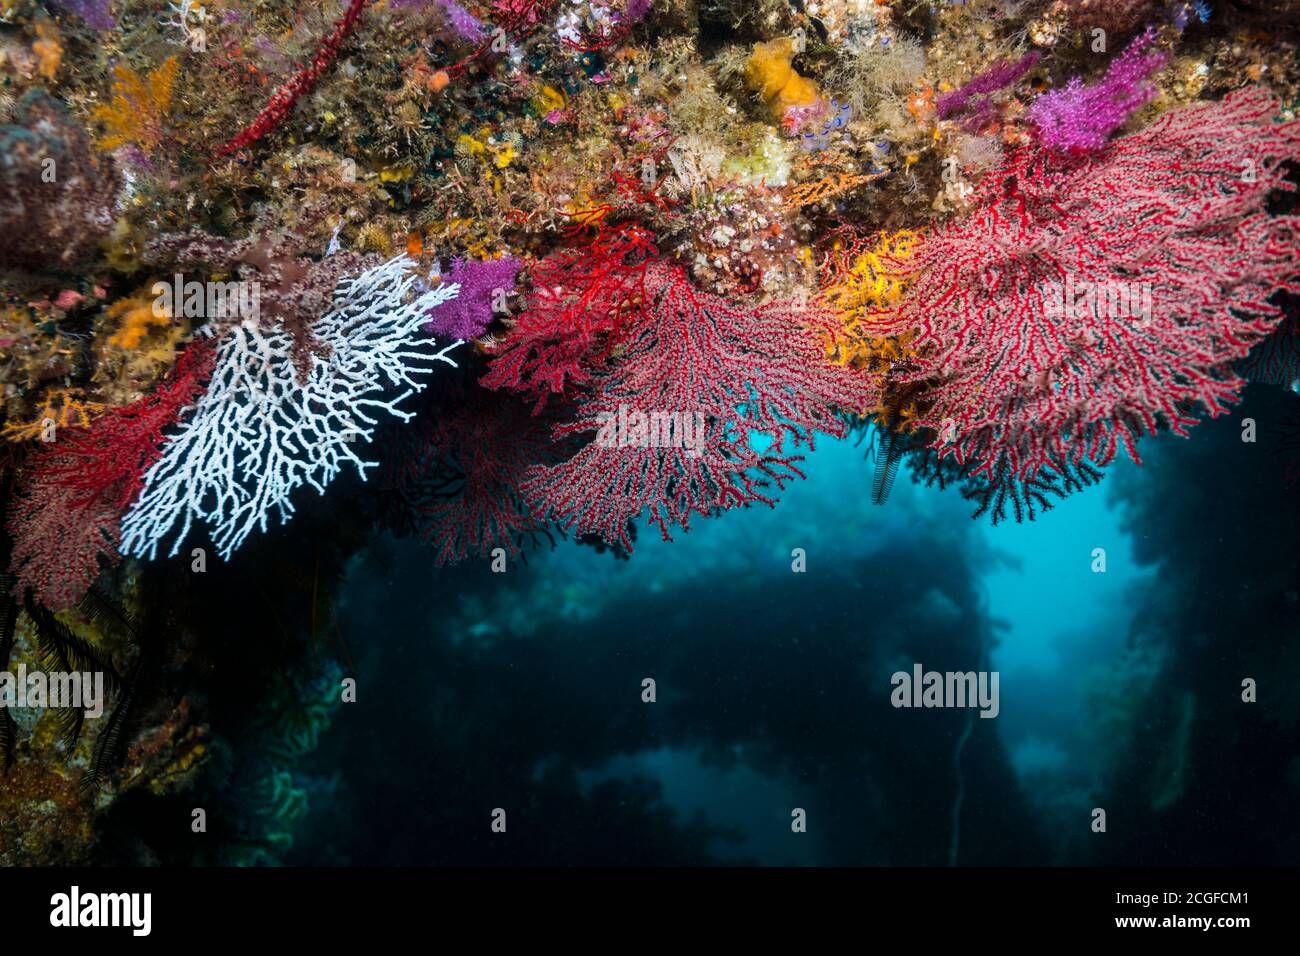 fan corals ,Melithaea flabellifera (Kükenthal, 1908), at artificial fish reef Stock Photo